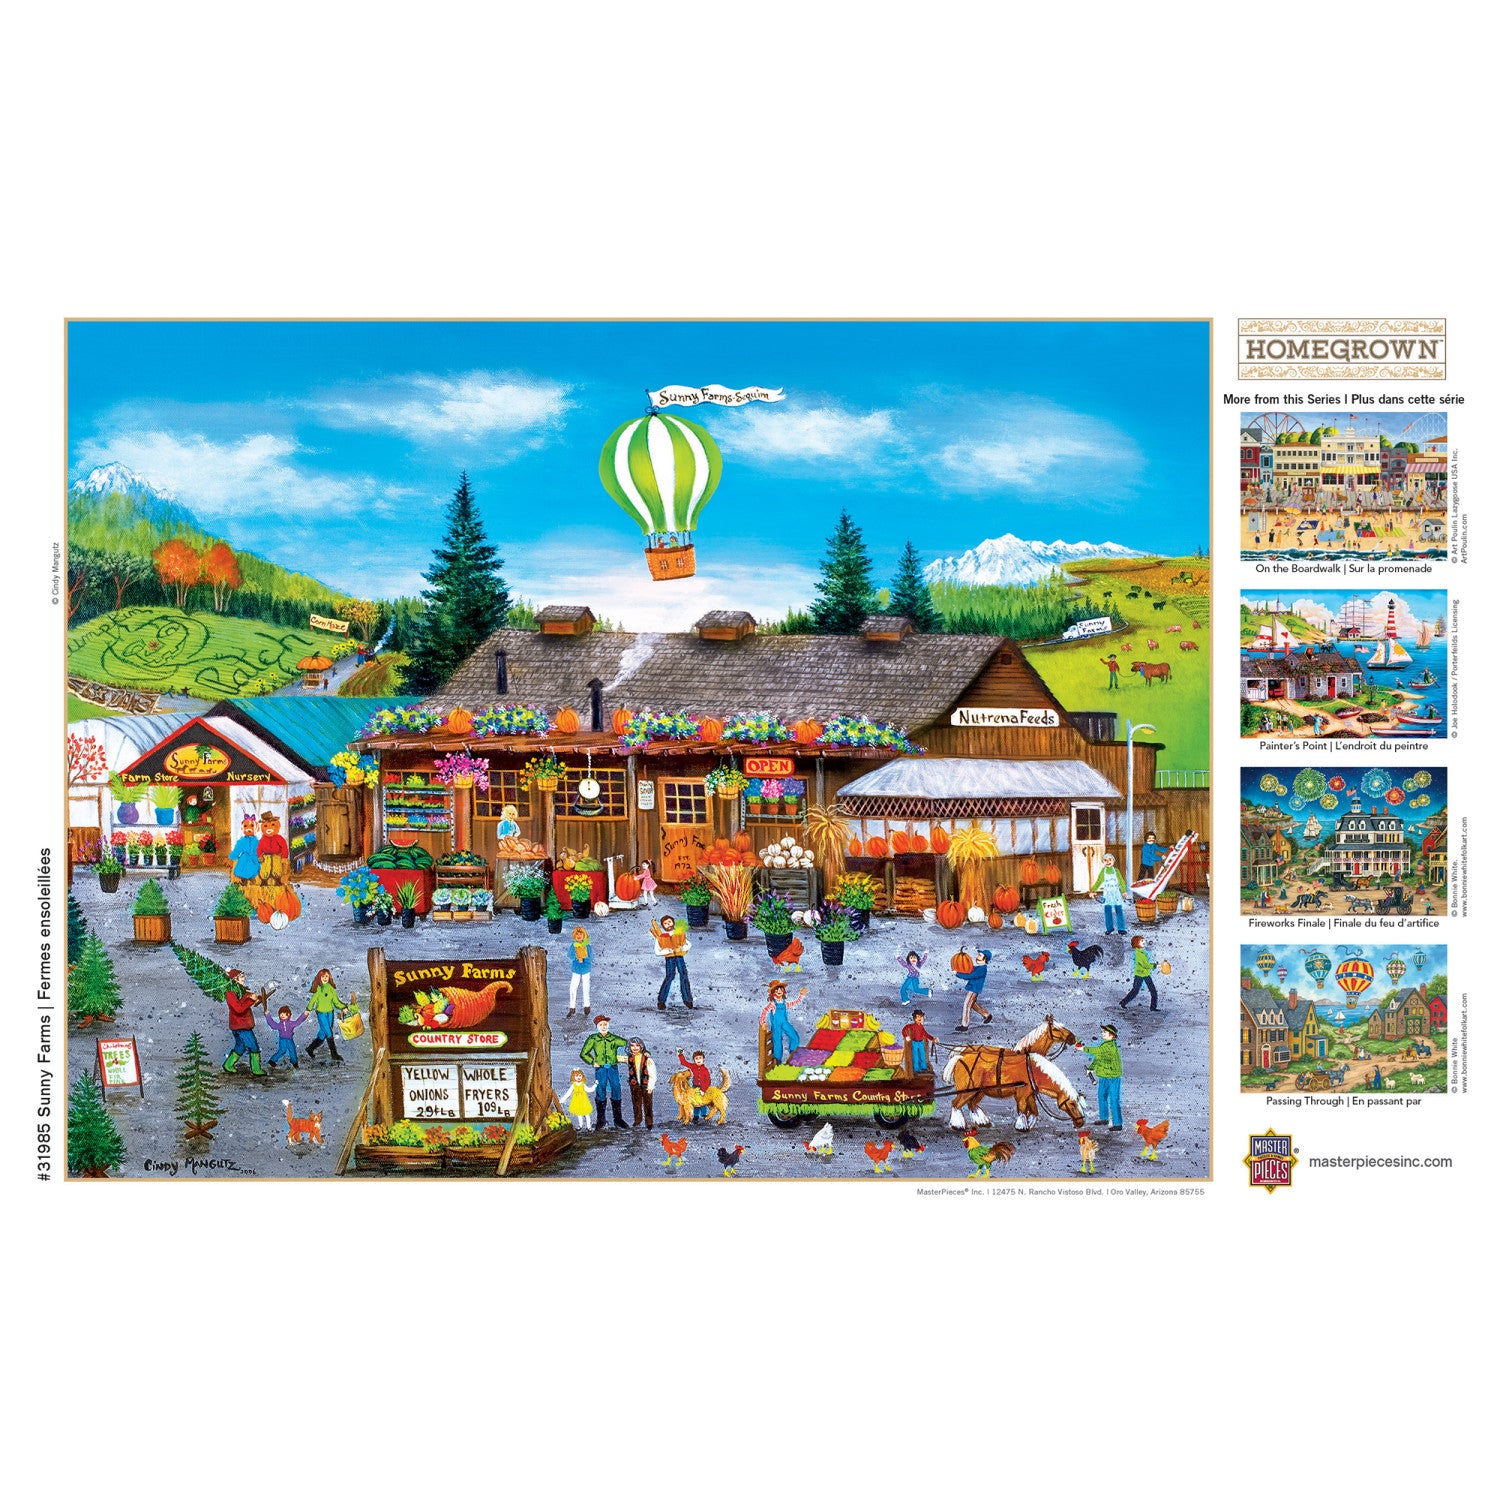 Homegrown - Sunny Farms 750 Piece Puzzle